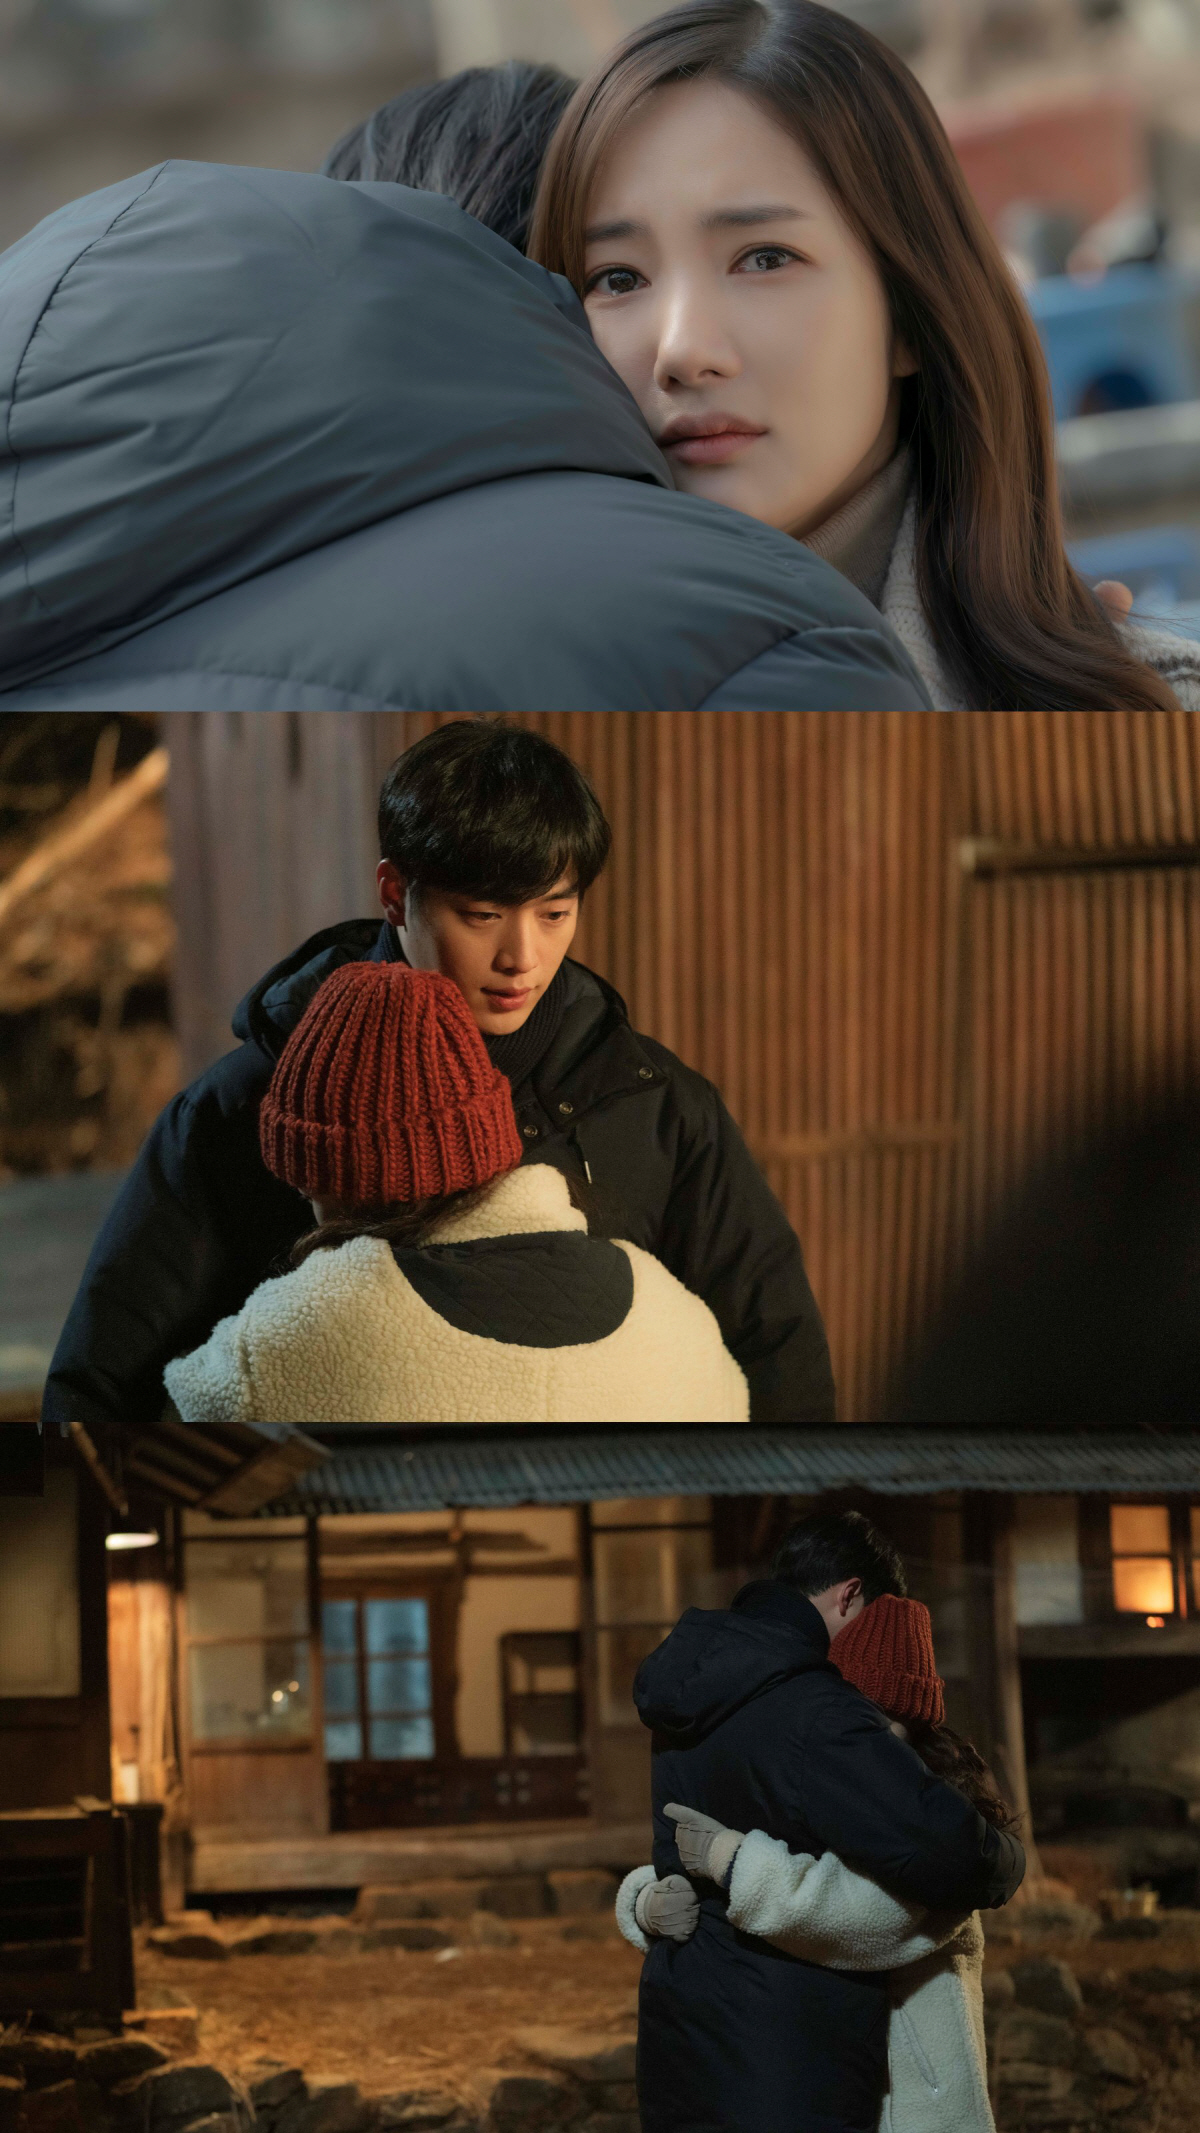 Is the ending page of JTBC Day back Park Min-young Kang-joon ahead of Spring eventually parting?Two species of hugs, which herald tears waterfall, have been unveiled.JTBCs monthly drama Ill Go If the Weather Is Good (playplayed by Han Ga-ram, directed by Han Ji-seung, Jang Ji-yeon, production ace factory, hereinafter Day back), which is running toward the last story, is about to air 15 times today (20th), and two kinds of tears of Umizaru (Park Min-young) and Im Eun-seop (Seo Kang-joon) The teal Series is being released, adding to the question of the fond story.In the 14th episode broadcast on the 14th, the story reached its peak by Lee Myung-yeo (Moon Jeong-hee), who failed to overcome the sense of debt of the heart, telling her nephew Umizaru the truth about the incident 10 years ago.Umizaru has been sickly because he has kept the truth that everyone in his family knew for ten years in secret.To comfort her, Eun-seop could not lock the bookstore door and ran one step and gave her a warm arms.The coming spring, the wind of Eun-seop, who had not left the heartbreaking, did not eventually happen.With the unpredictable relationship between Umizaru and Eun-seop in the sea of sadness, I feel a sense of sadness for the two people who are hugging tears in the SteelSeries released today (20th).Umizau, who was released immediately after the broadcast, said, Is all this really something I do not know?Eun-seop, who is keeping the side of Umizaru, is holding her sadness with her silver arms, saying, You will be sick, perhaps you will carry it instead.So what is the meaning of the second hug of Umizaru and Eunseop that were released together?Eun-seop looks for another night-time cottage that he would never climb without his mothers permission, and it seems that there is a deep loneliness again on his shadowy face.Is it related to Umizarus heartbreaking farewell words, Im leaving; Spring is here?Moreover, this time, Umizaru is hugging Eun-seop first, raising questions about the ending page of the two.The production team said, Spring came to North Hyun-ri.Like a tree that takes the energy of Spring and sprouts fresh new leaves, Umizaru and Eunseop will be able to sprout new leaves again with the energy of Spring, and the story of what meaning and feelings will be contained in the tears of Umizaru and Eunseop. Day back 15th, which left just two broadcasts, today (20th) Monday night at 9:30 JTBC broadcast.